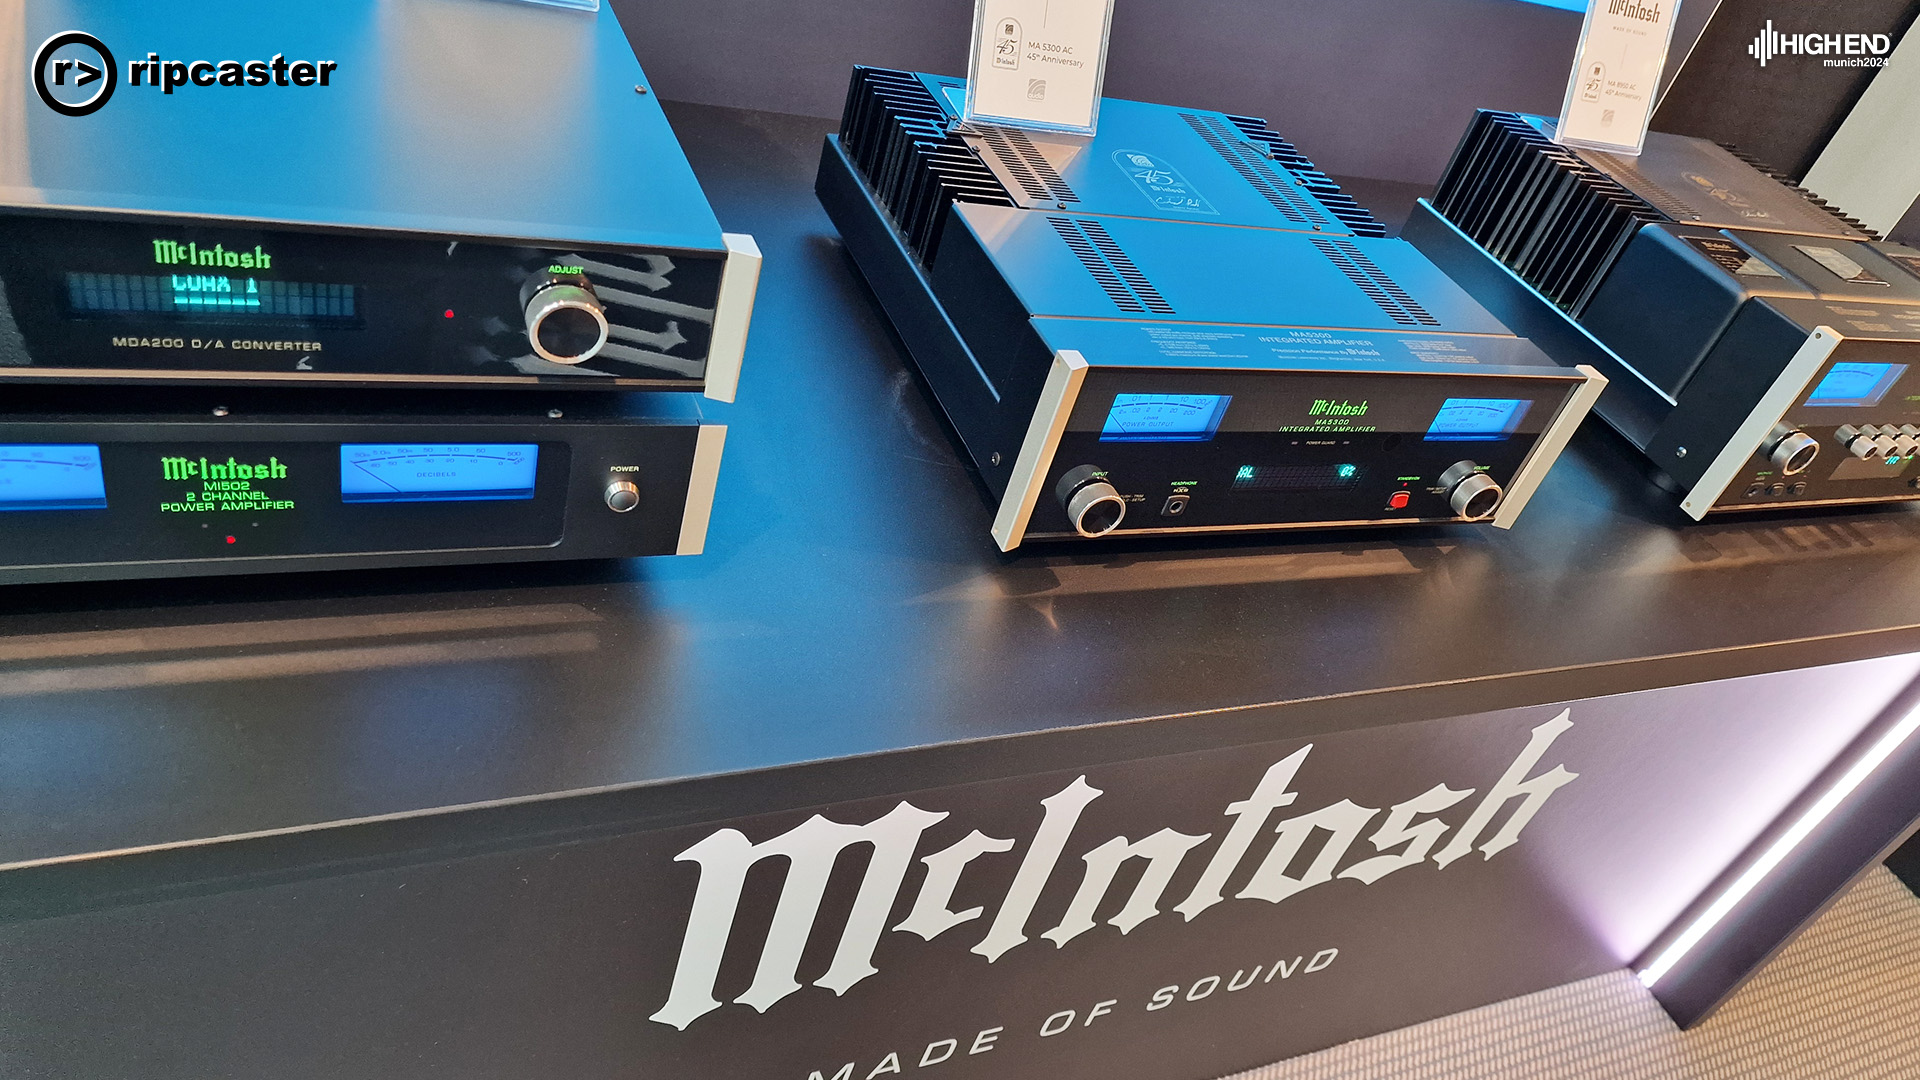 McIntosh equipment on a low black stand